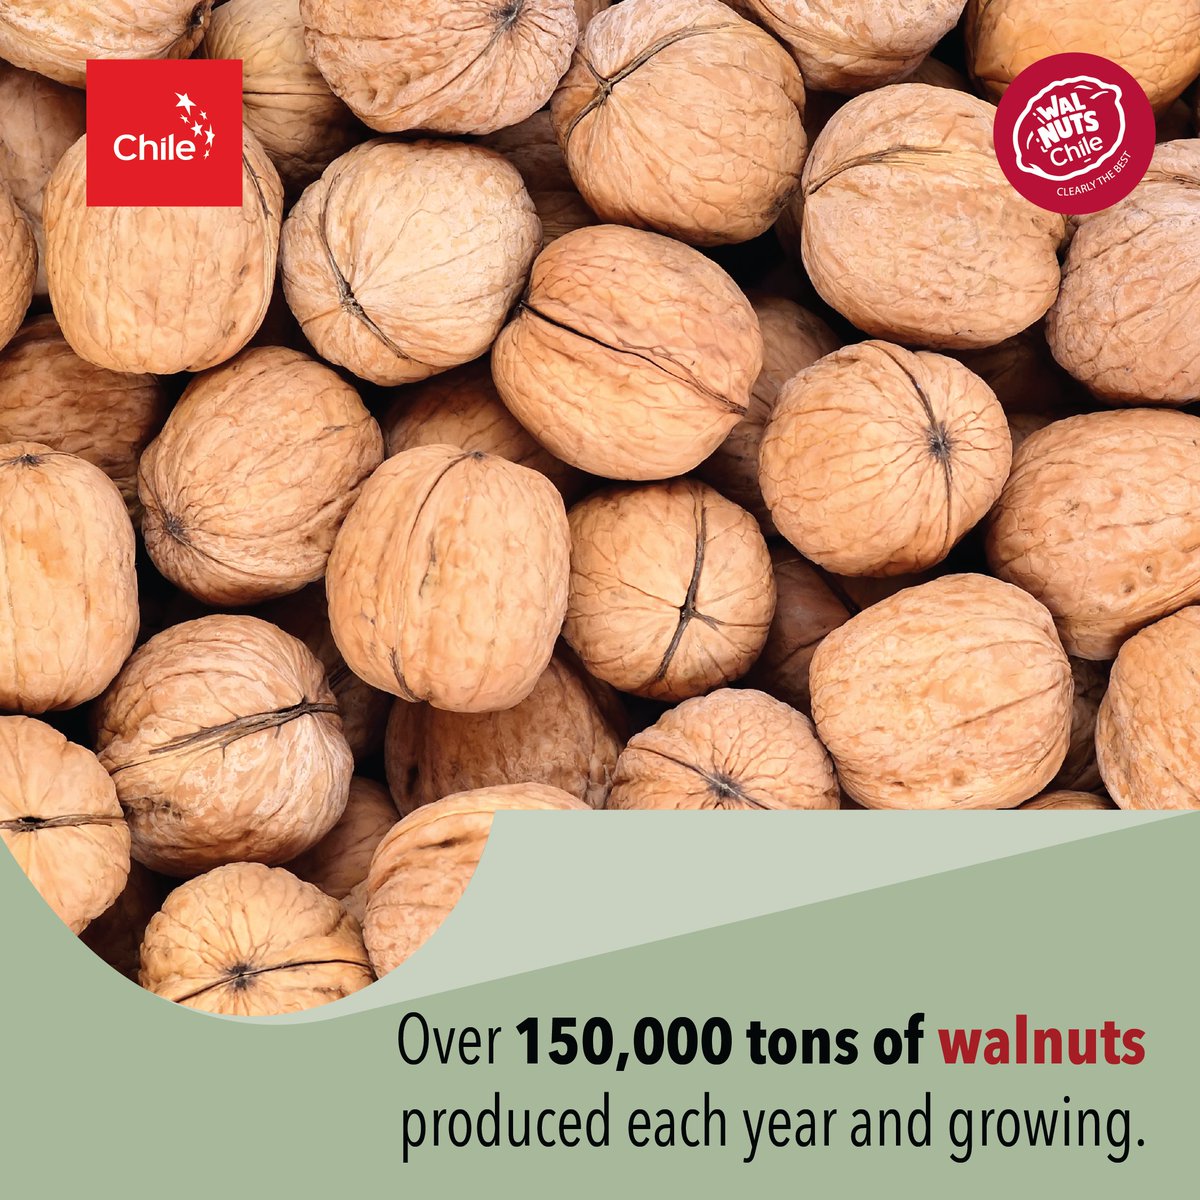 Witness the pursuit of excellence!

#WalnutChile #walnuts #chileanwalnuts #ChileWalnutsIndia #brainfood #smartfood #HarvestExcellence #AgriculturalJourney